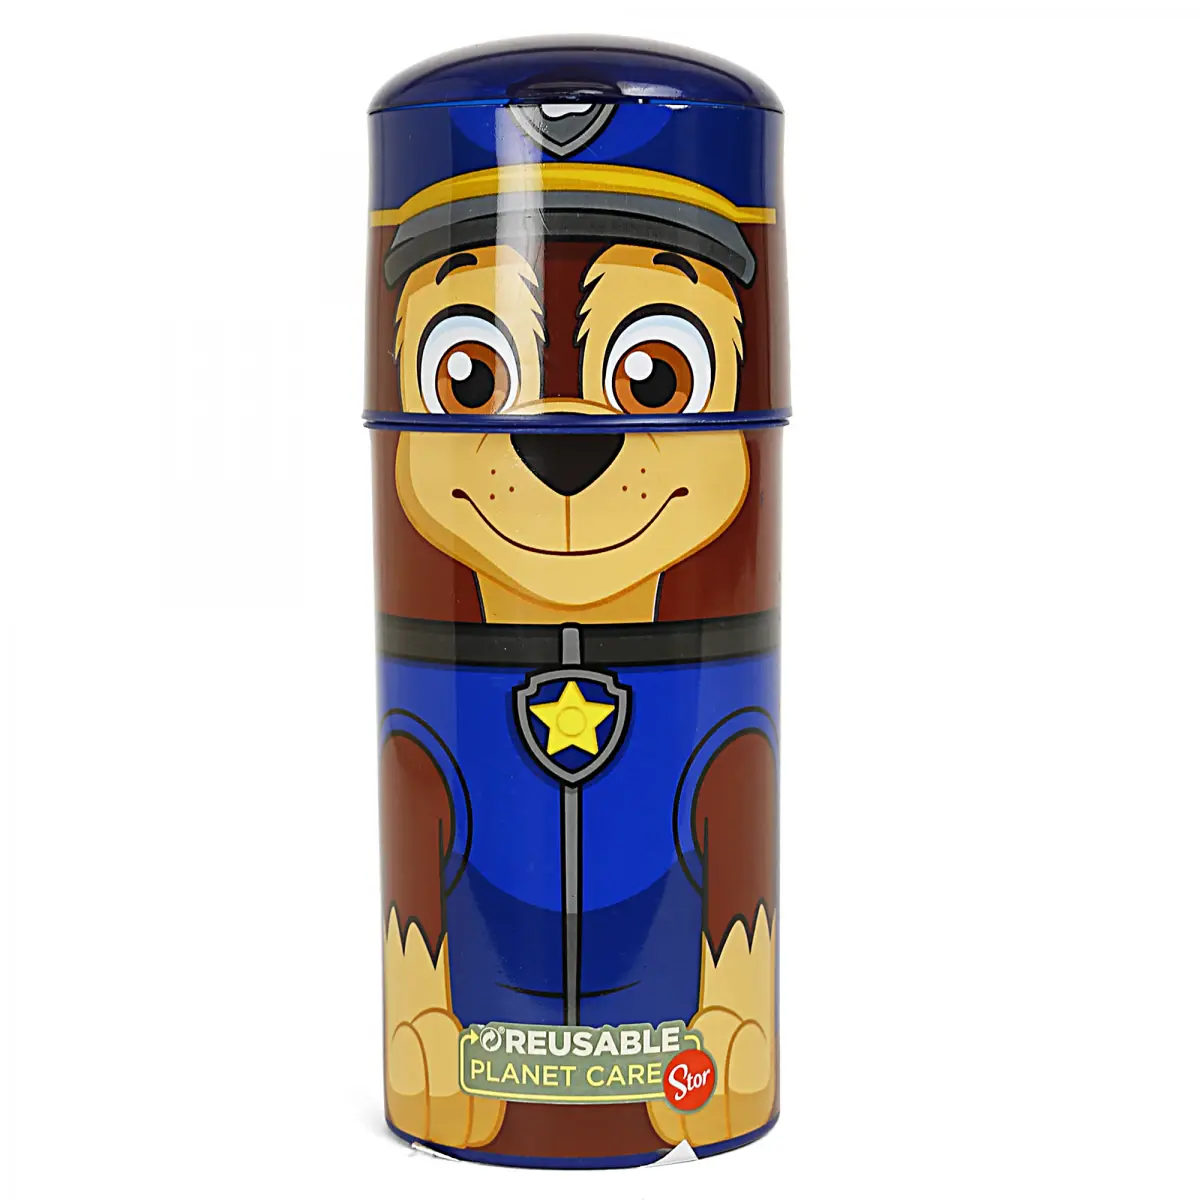 Paw Patrol Chase Stor Character Sipper Bottle, 350ml, Multicolour